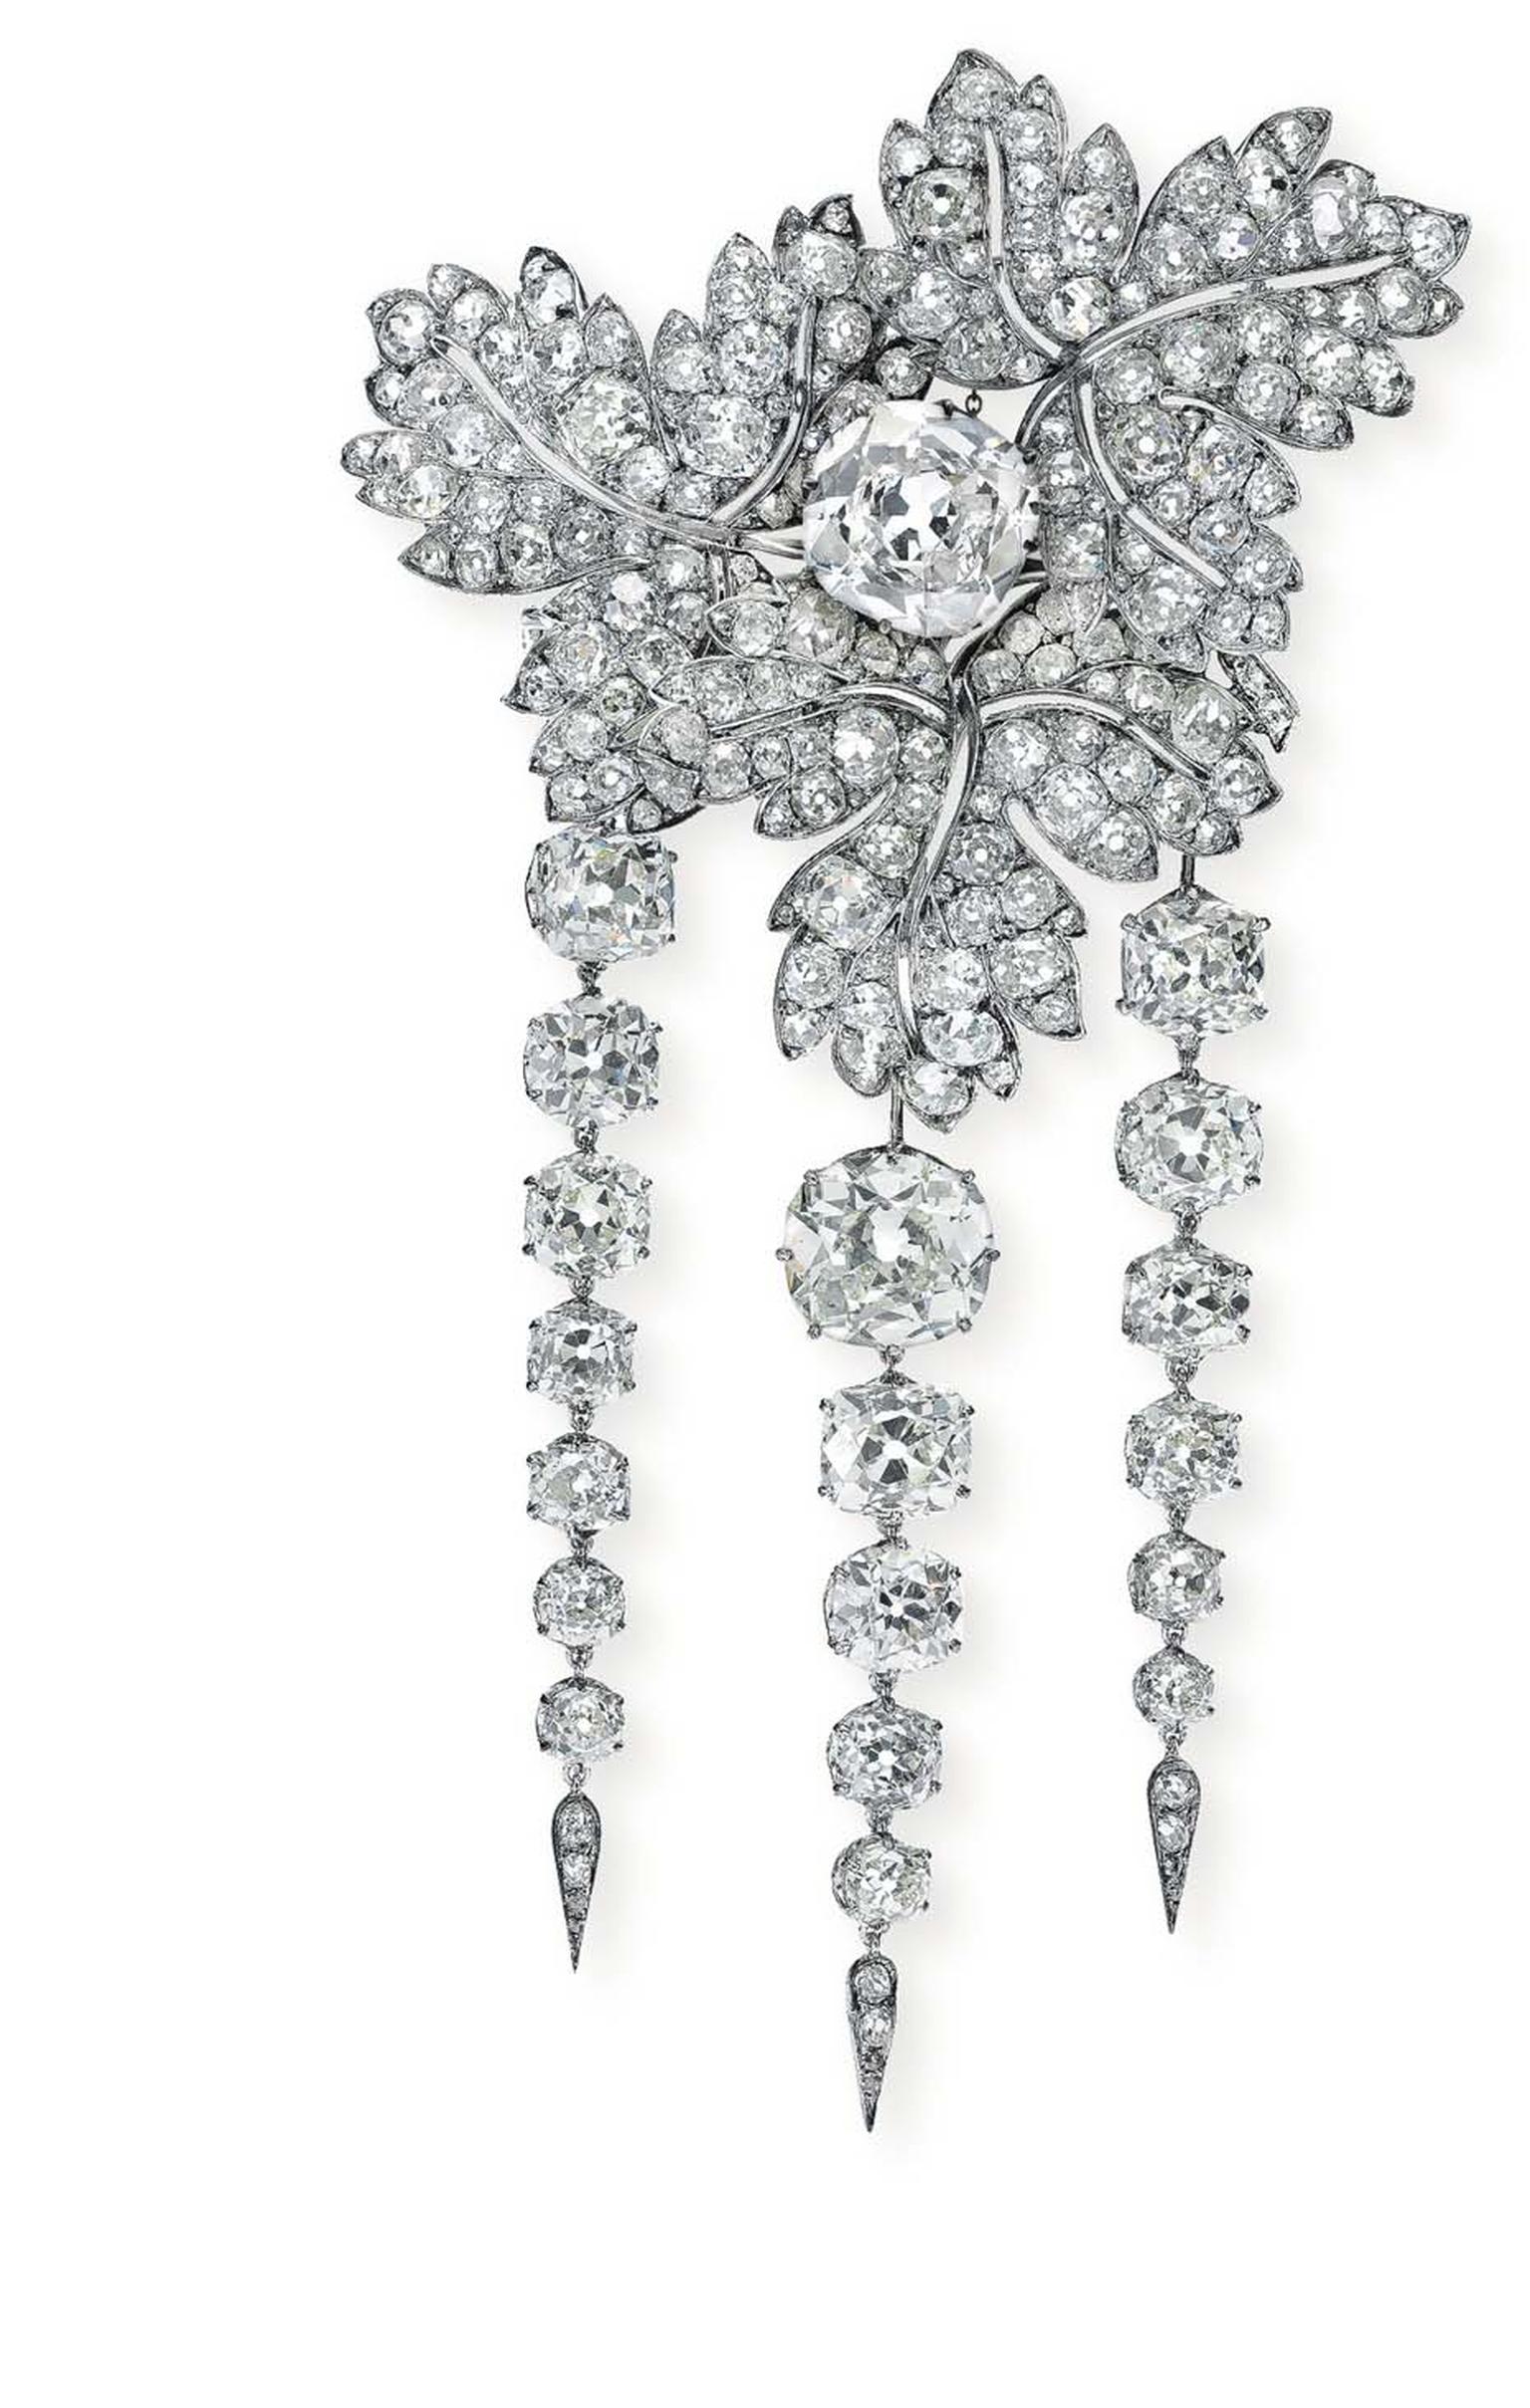 A brooch of royal provenance that once belonged to Empress Eugenie of France will be auctioned at Christie's Geneva on 11 November 2014 as part of its Magnificent Jewels sale (estimate: $2-3 million).